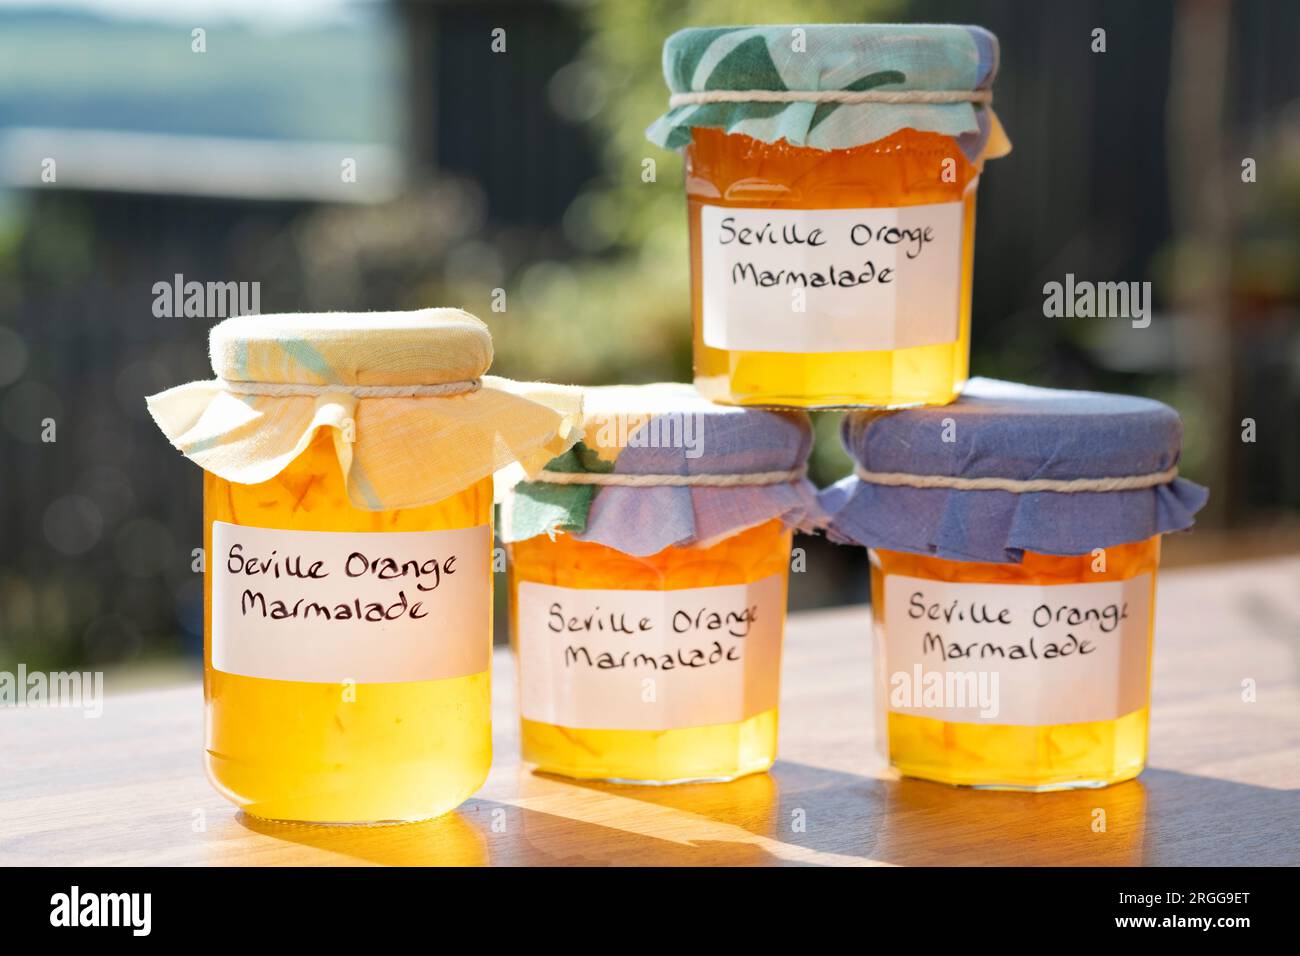 a group of jars containing home made Seville orange marmalade. The jars have hand written labels and fabric toppings over the lids Stock Photo